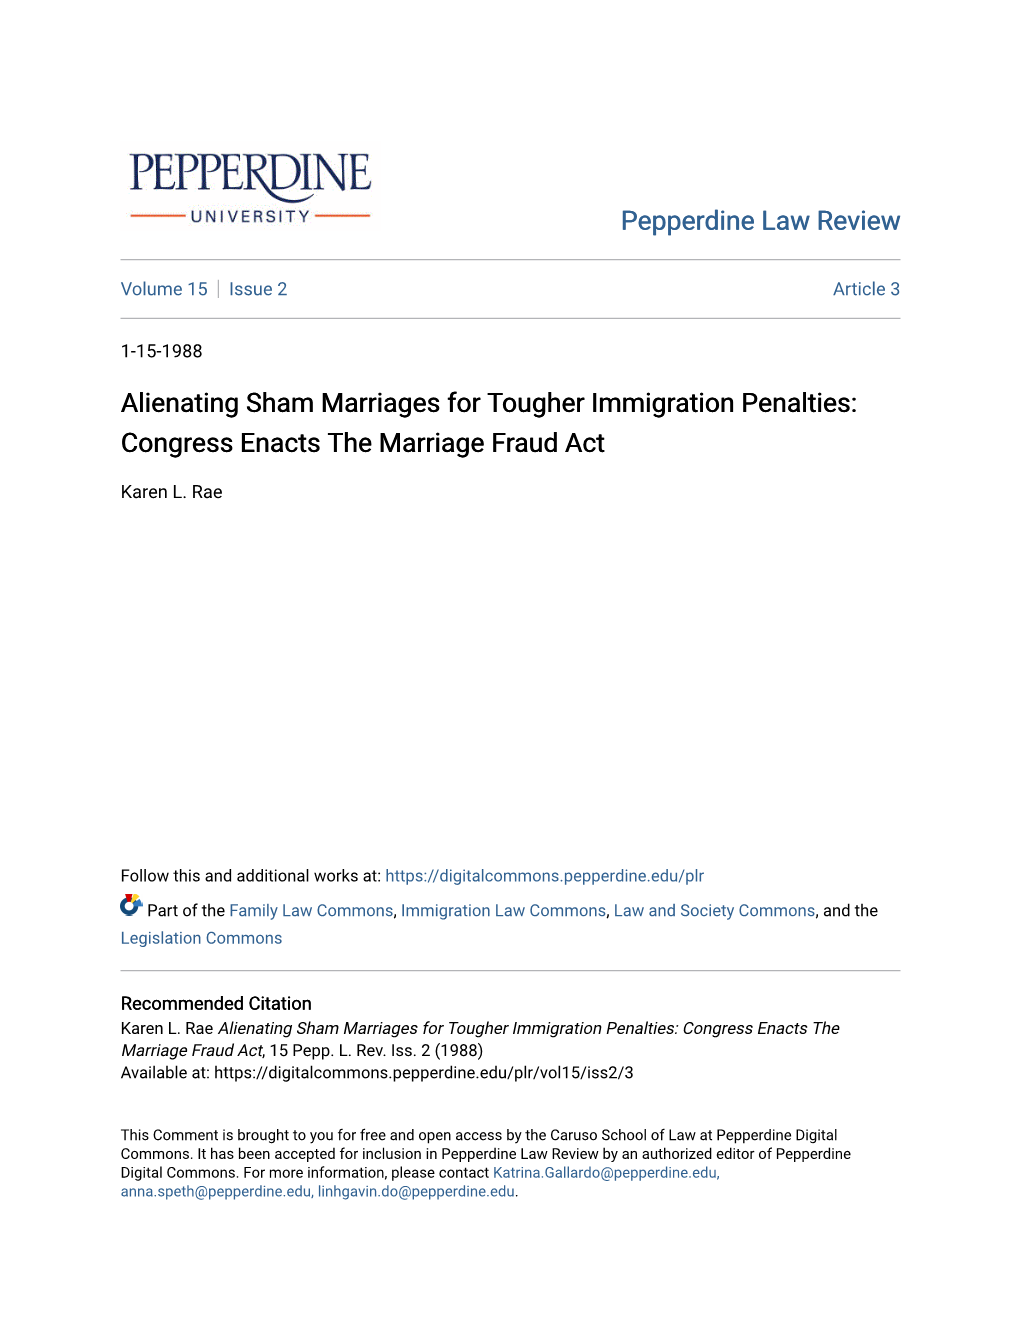 Alienating Sham Marriages for Tougher Immigration Penalties: Congress Enacts the Marriage Fraud Act